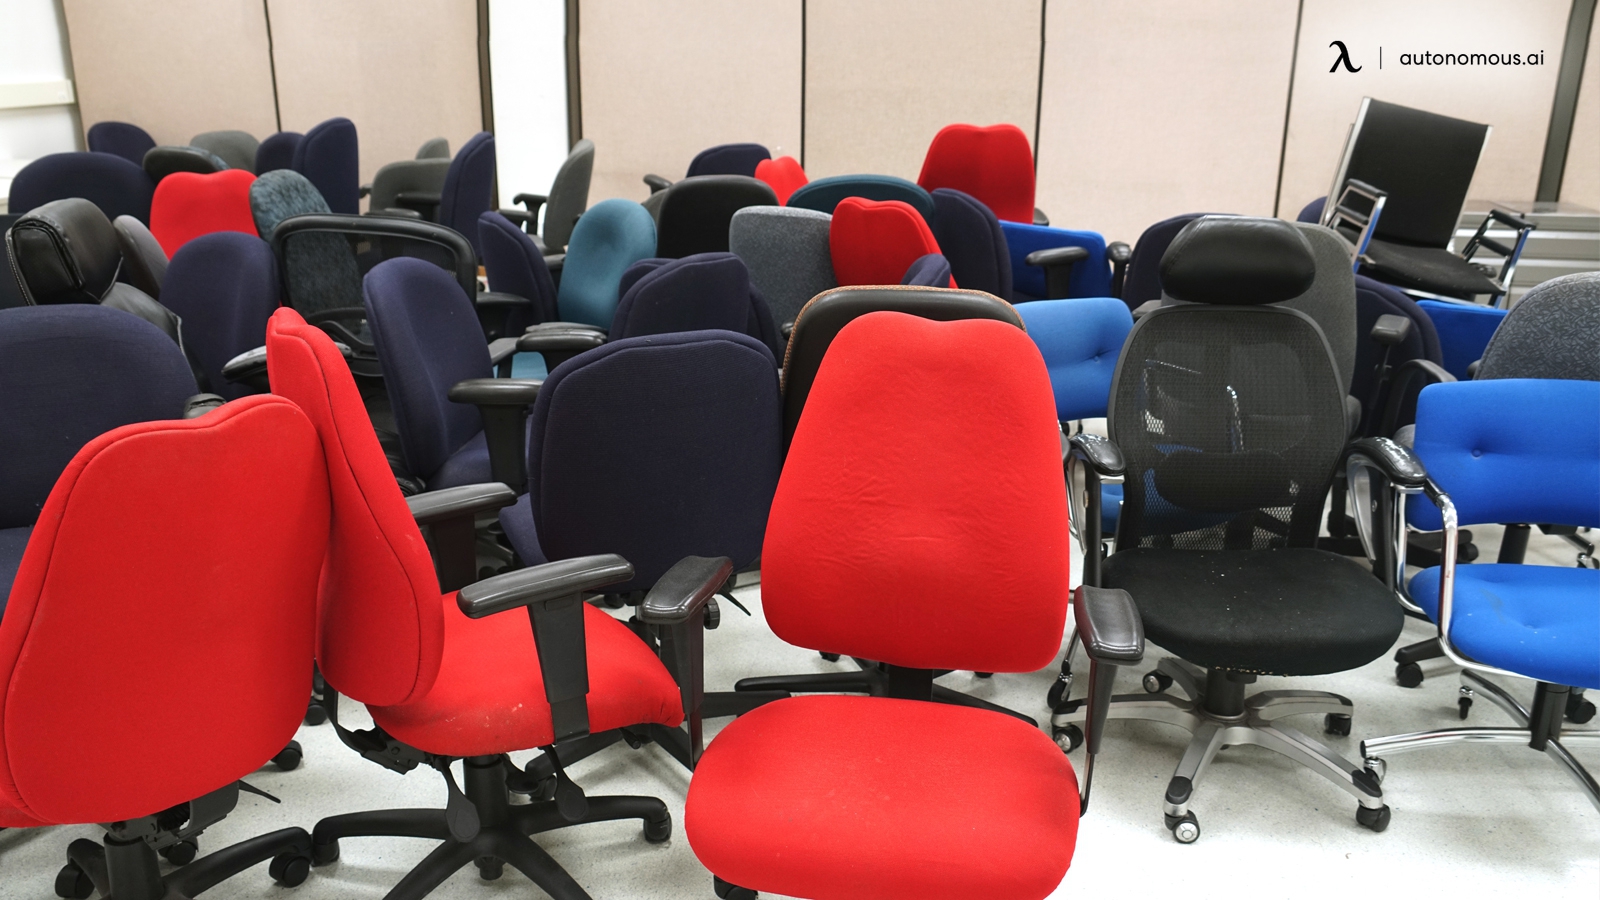 The Pros and Cons of Buying Chairs from Office Liquidations